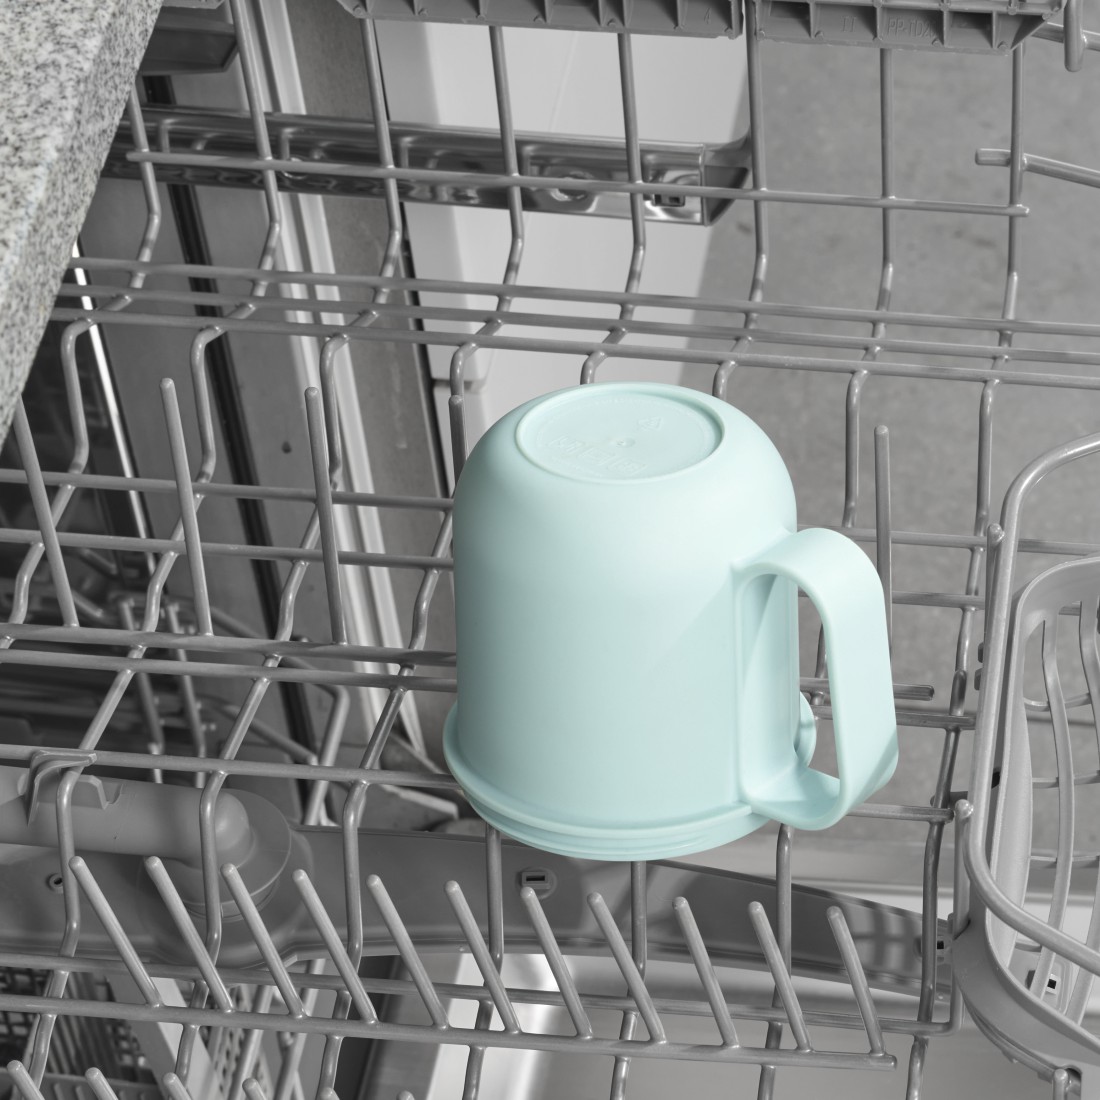 awx2 High-Res Appliance 2 - Xavax, Cereal Mug To Go, with Topper, 2 Compartments, 500 + 200 ml, pastel blue/grey